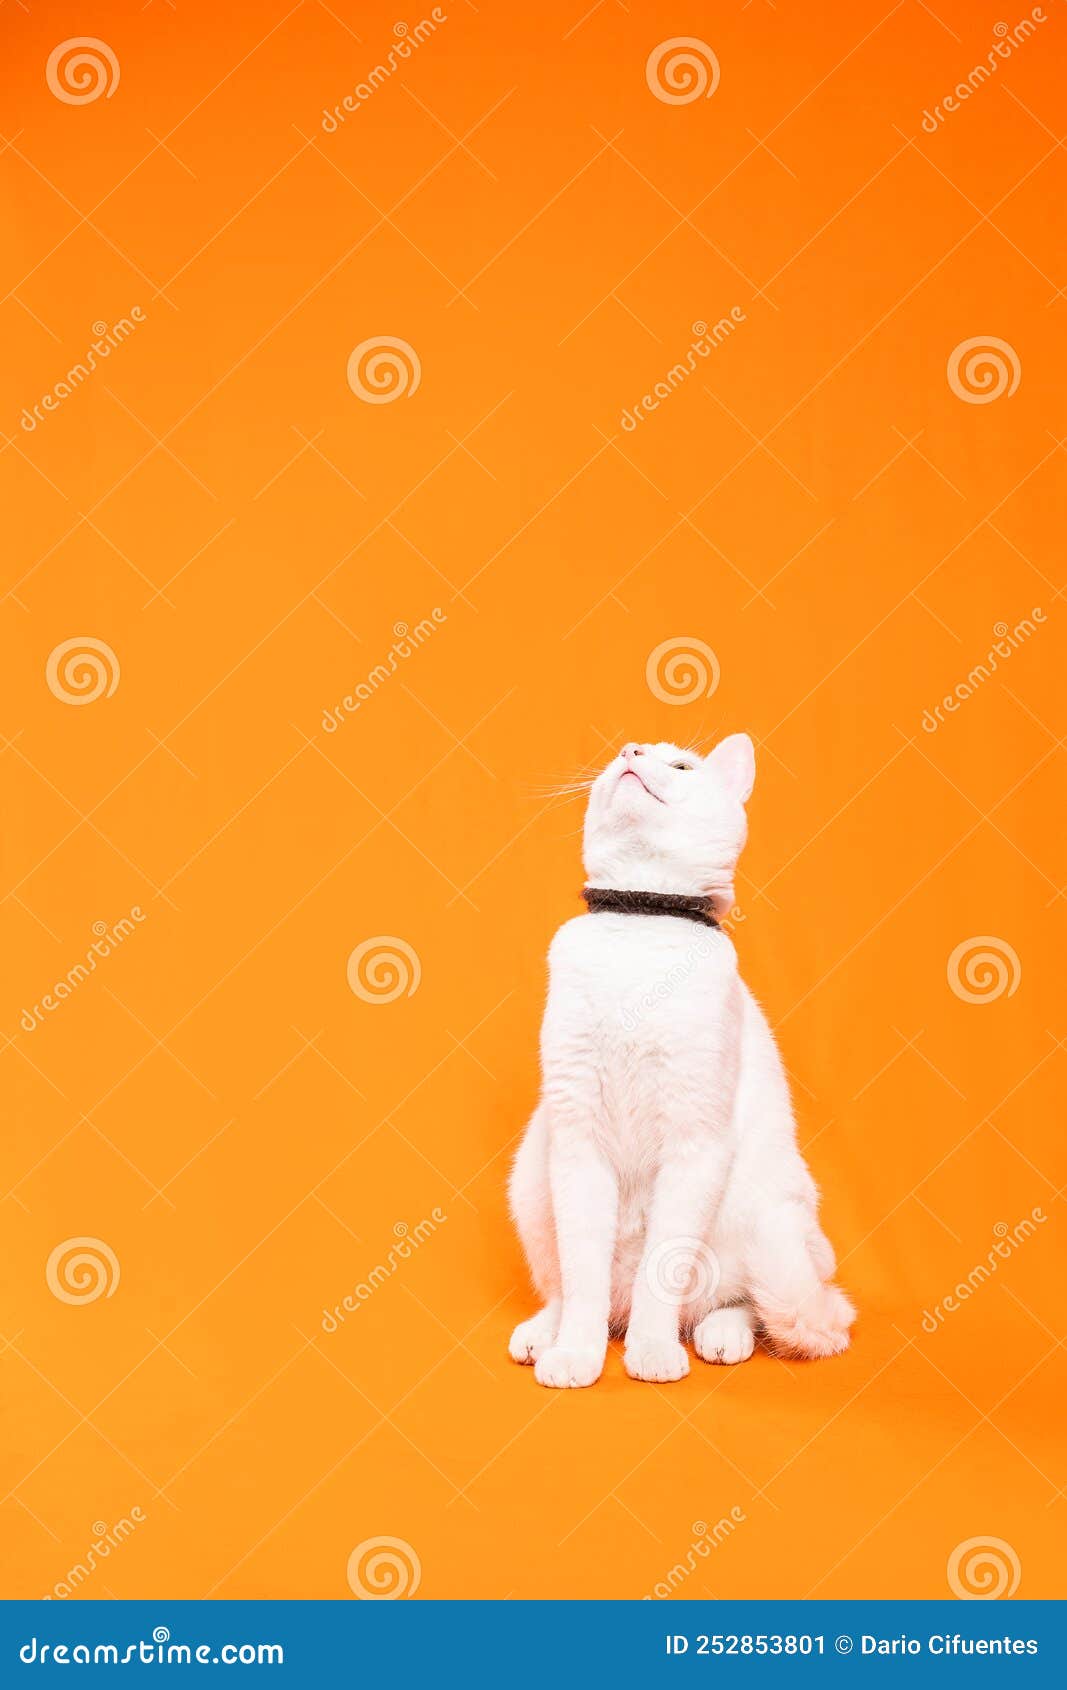 very small white cat curiously looks up, orange background